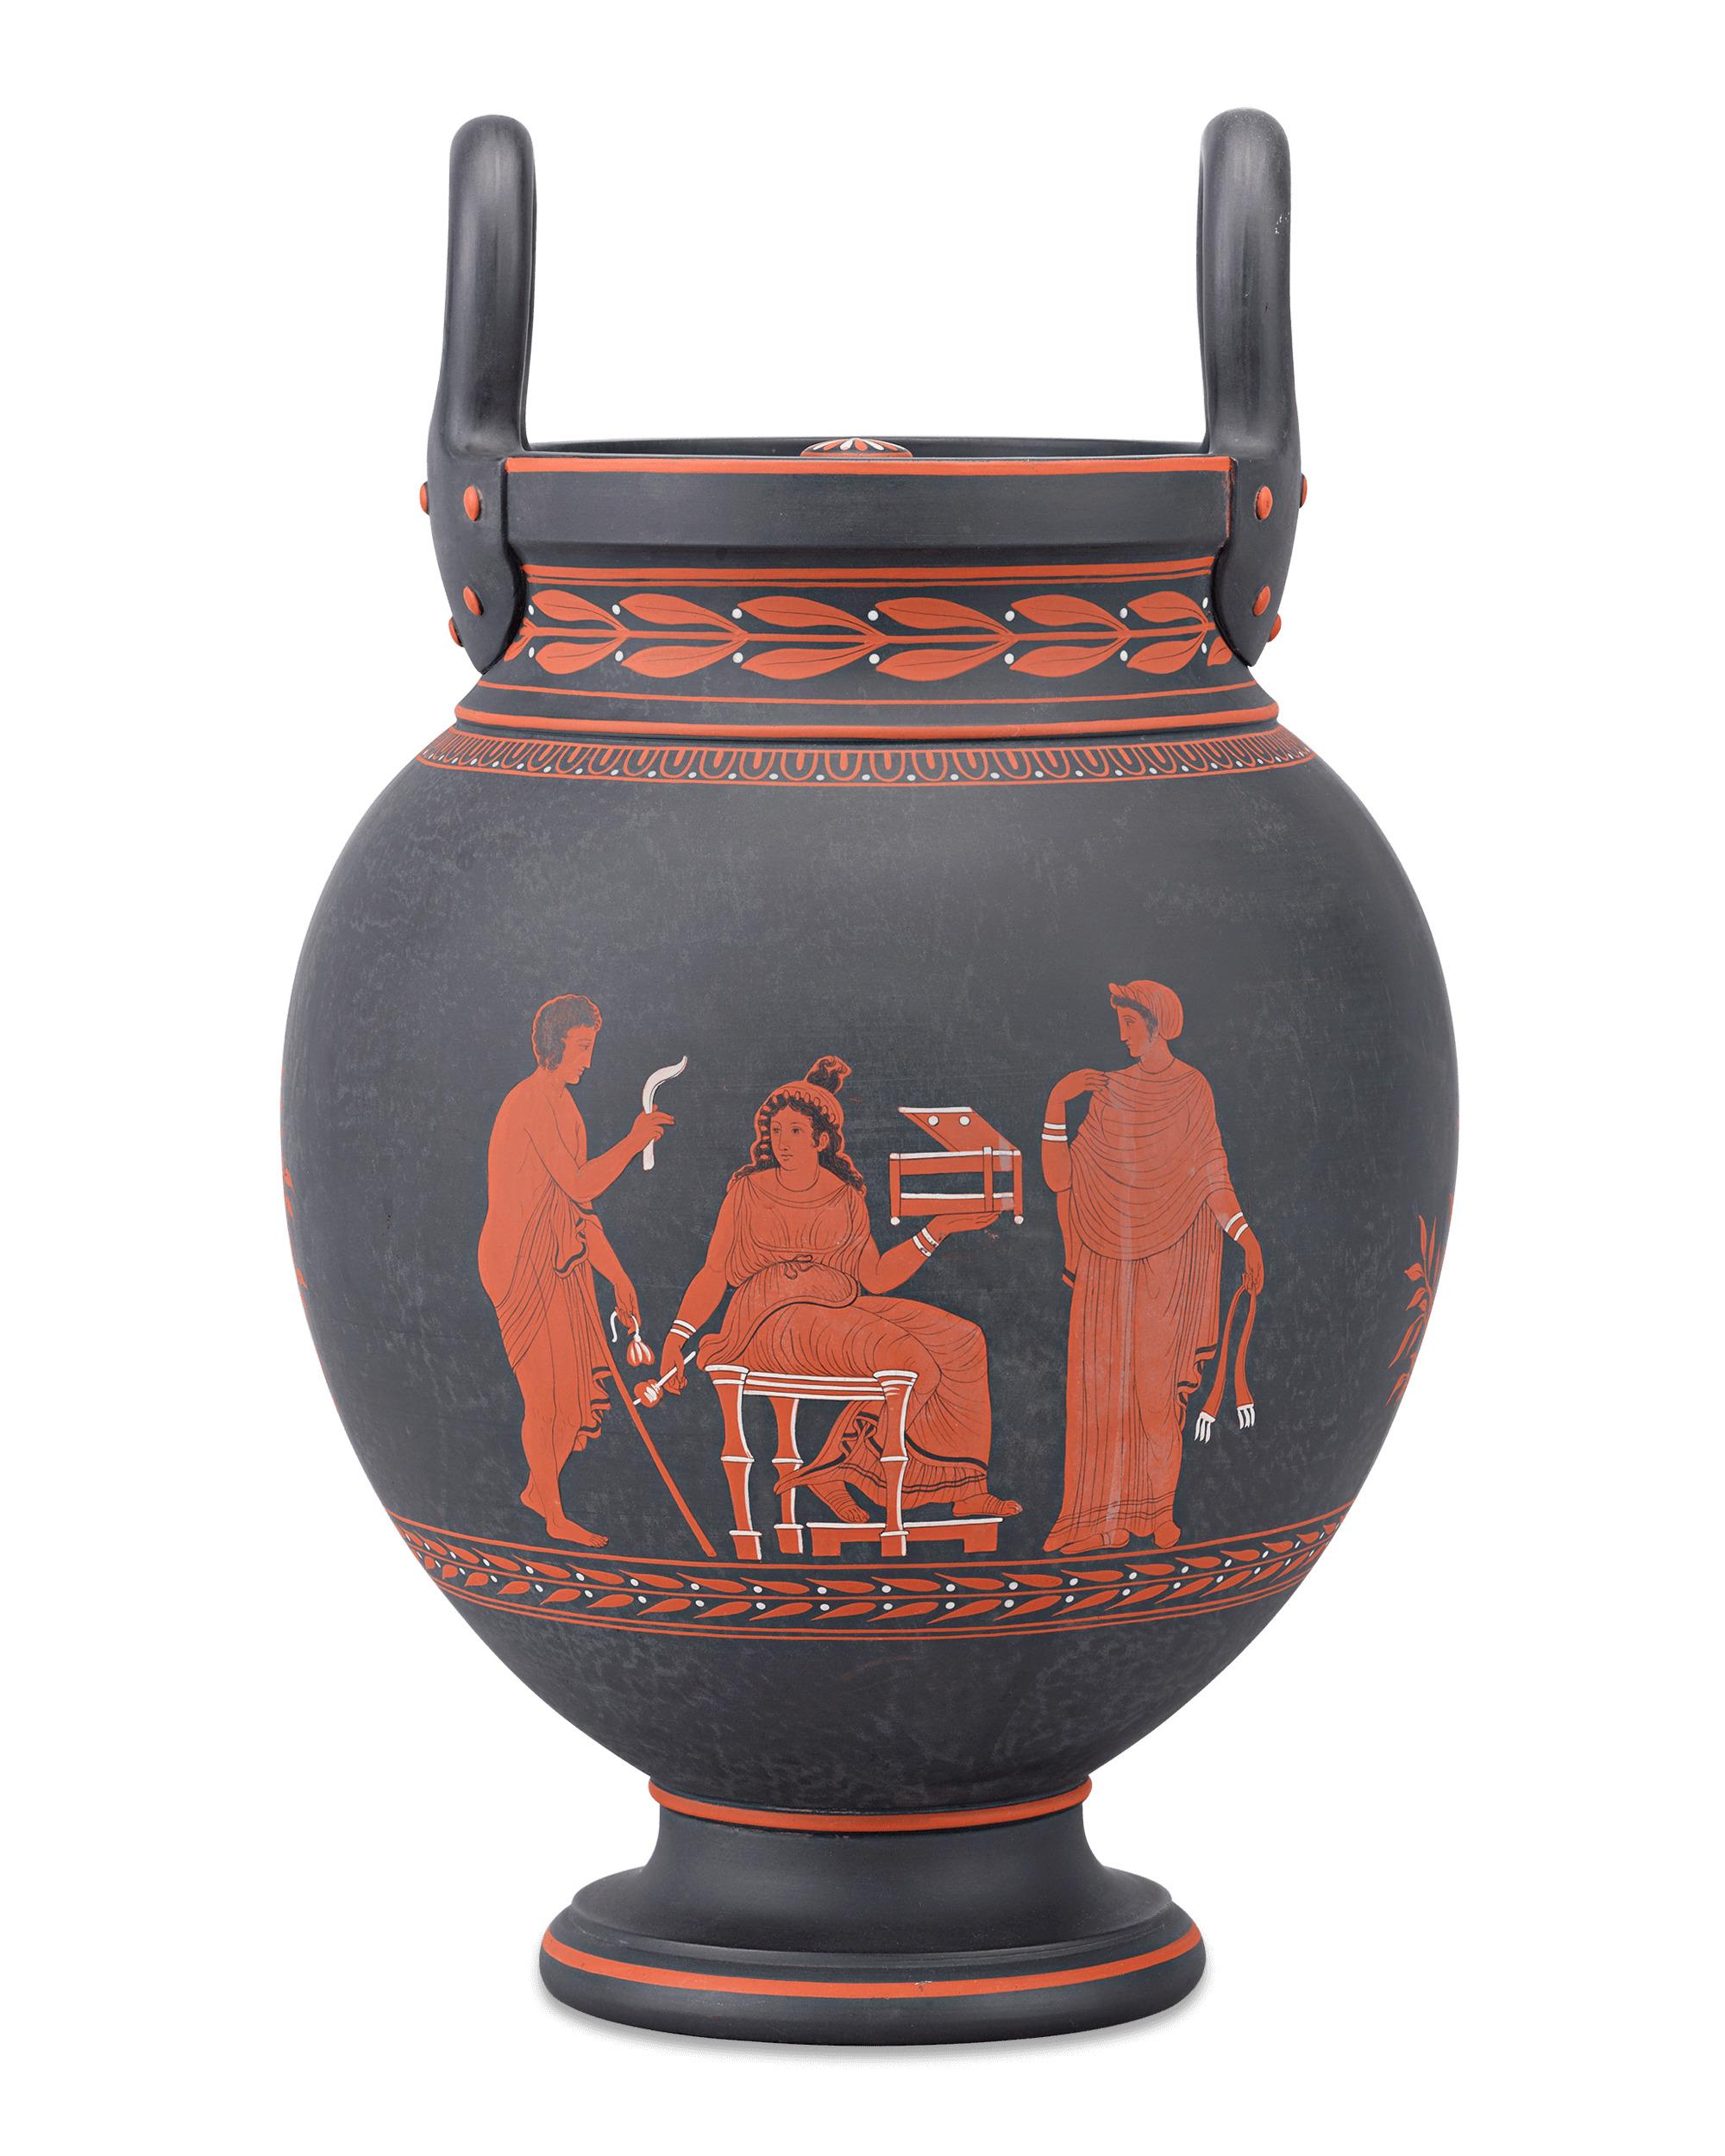 Crafted by Wedgwood, this stately neoclassical volute krater vase is comprised of black basalt, largely considered the famed English firm’s greatest innovation. This beautiful vase is topped by a pierced lid, which allows the piece to be used as